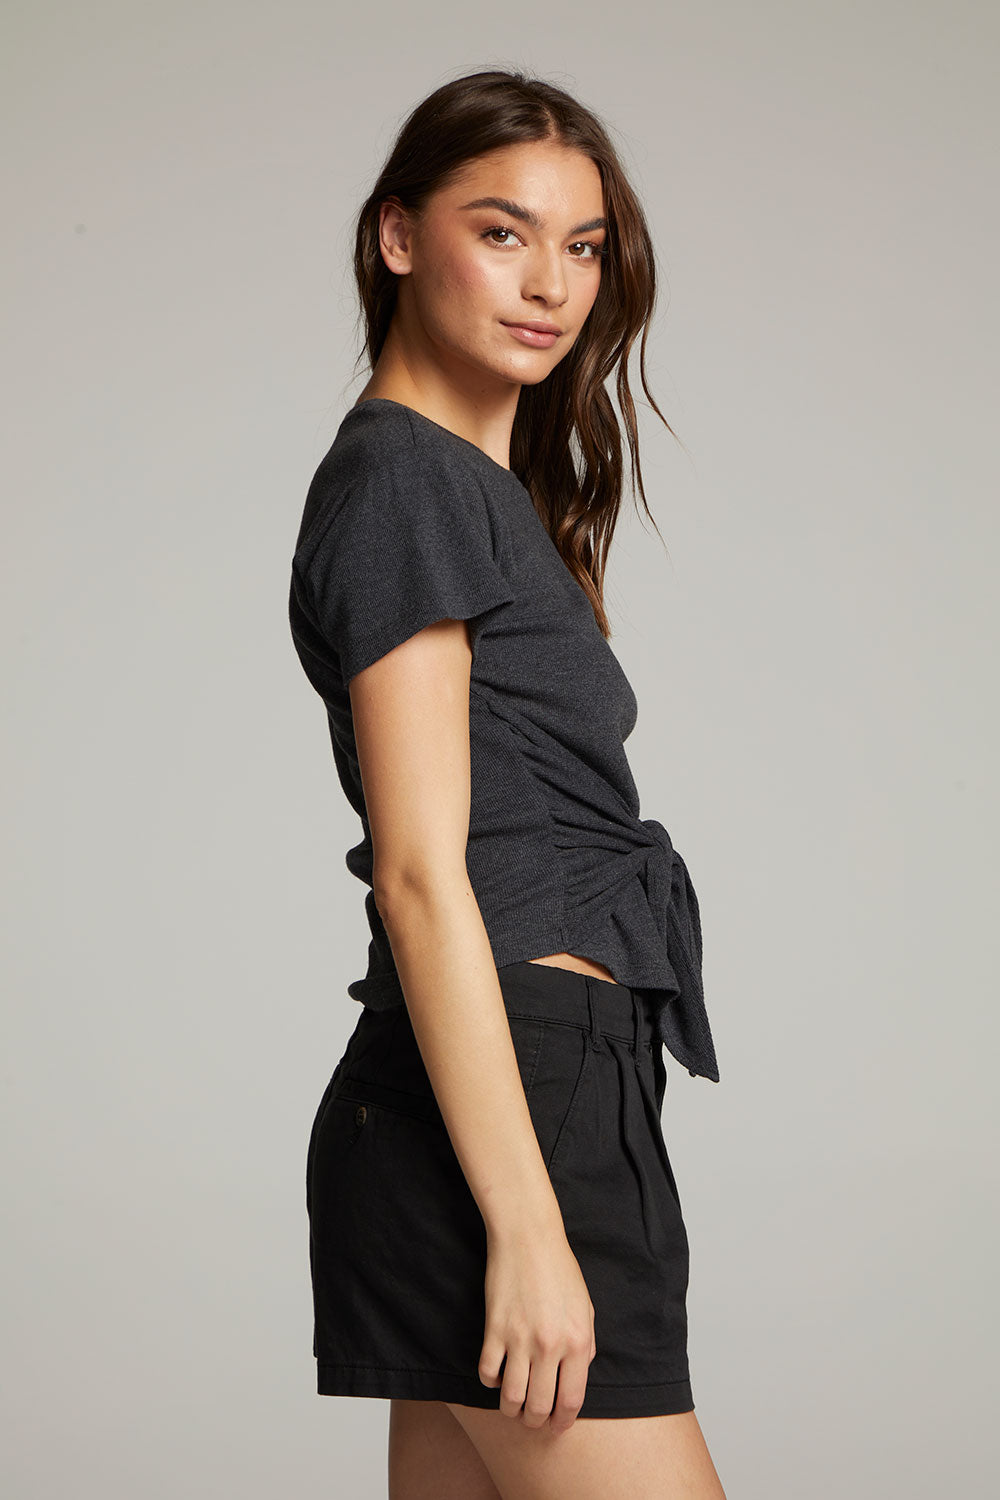 Mia Black Top WOMENS chaserbrand